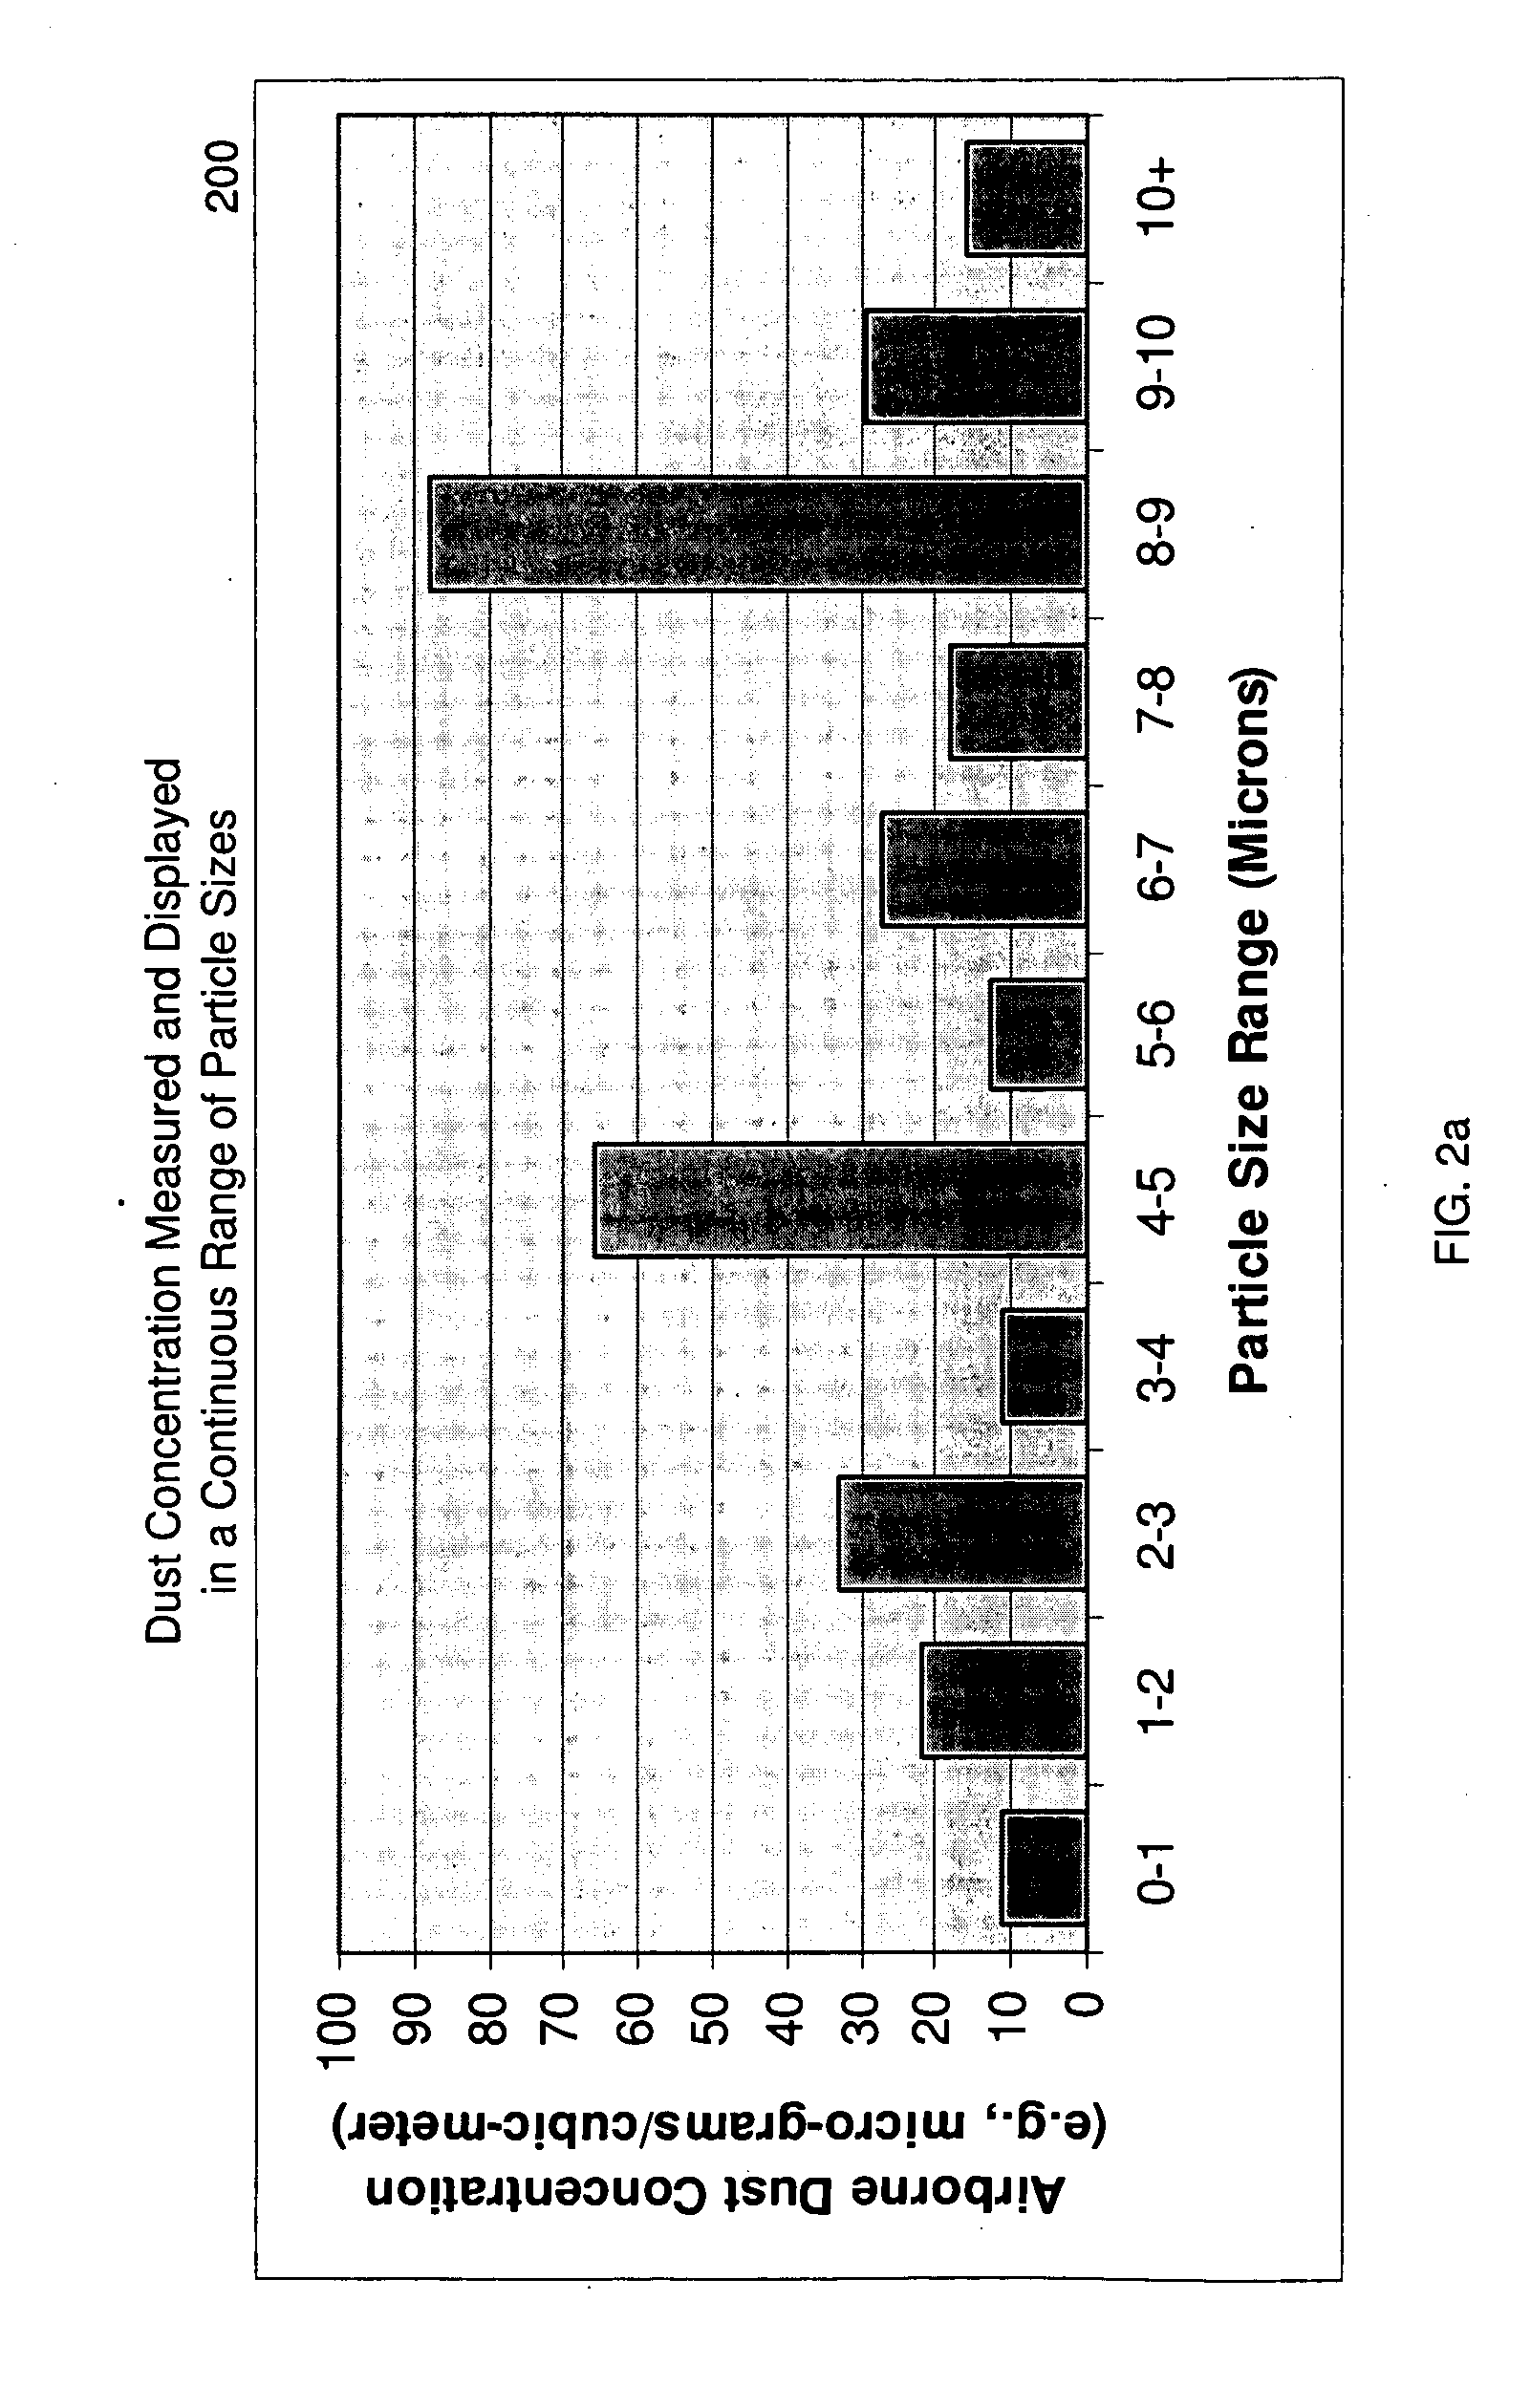 Methods and Systems for Analysis, Reporting and Display of Environmental Data